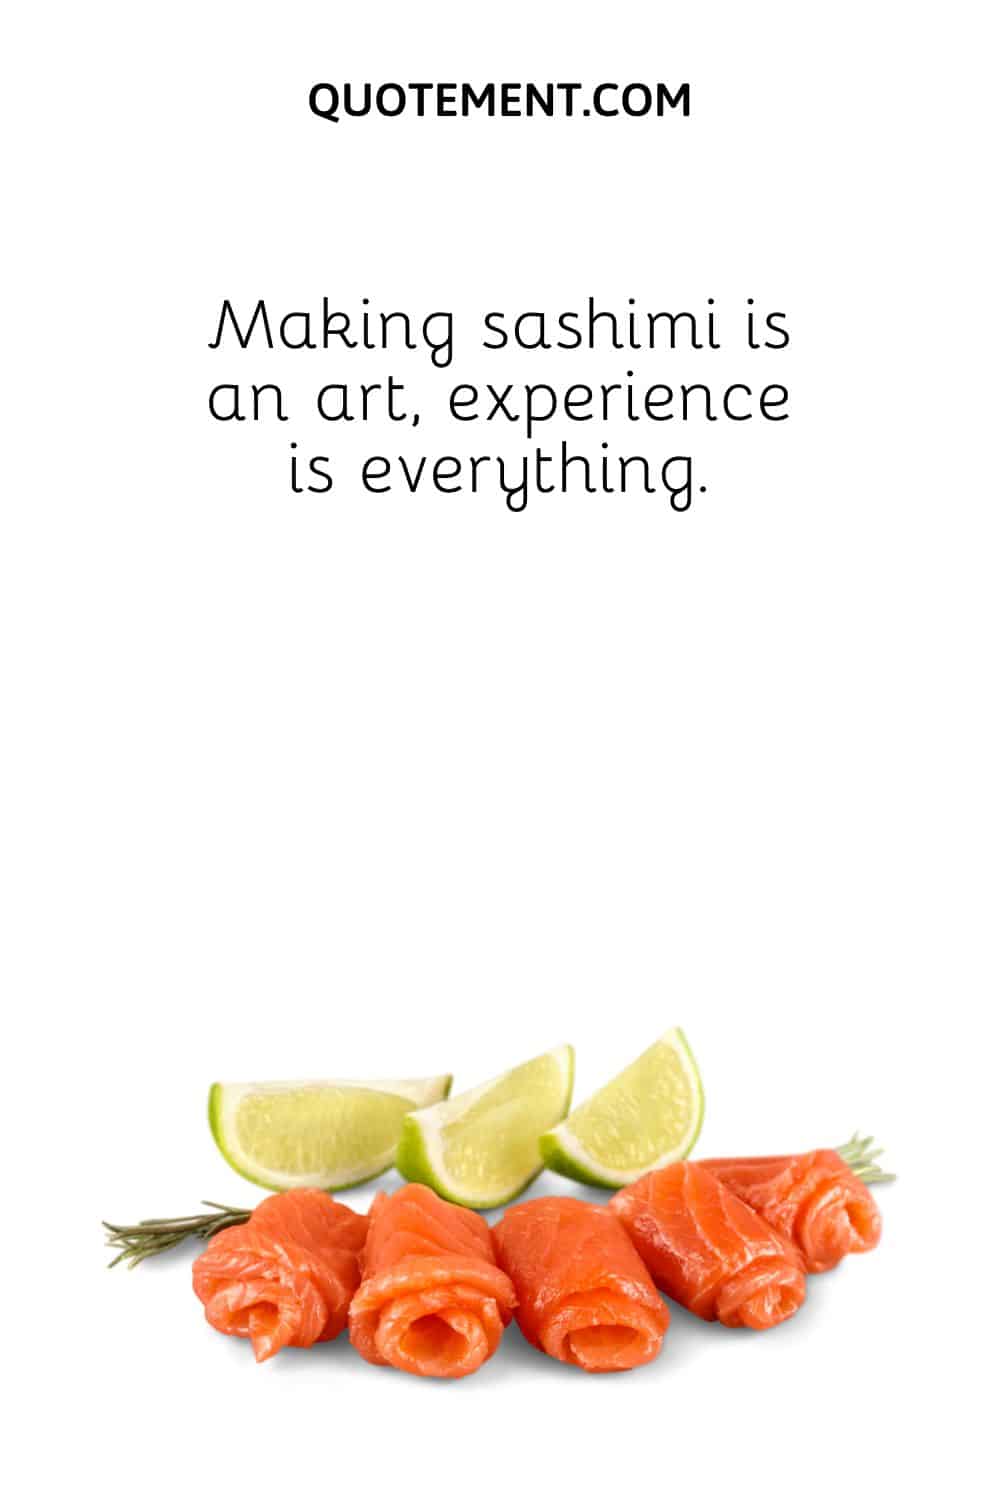 Making sashimi is an art, experience is everything.